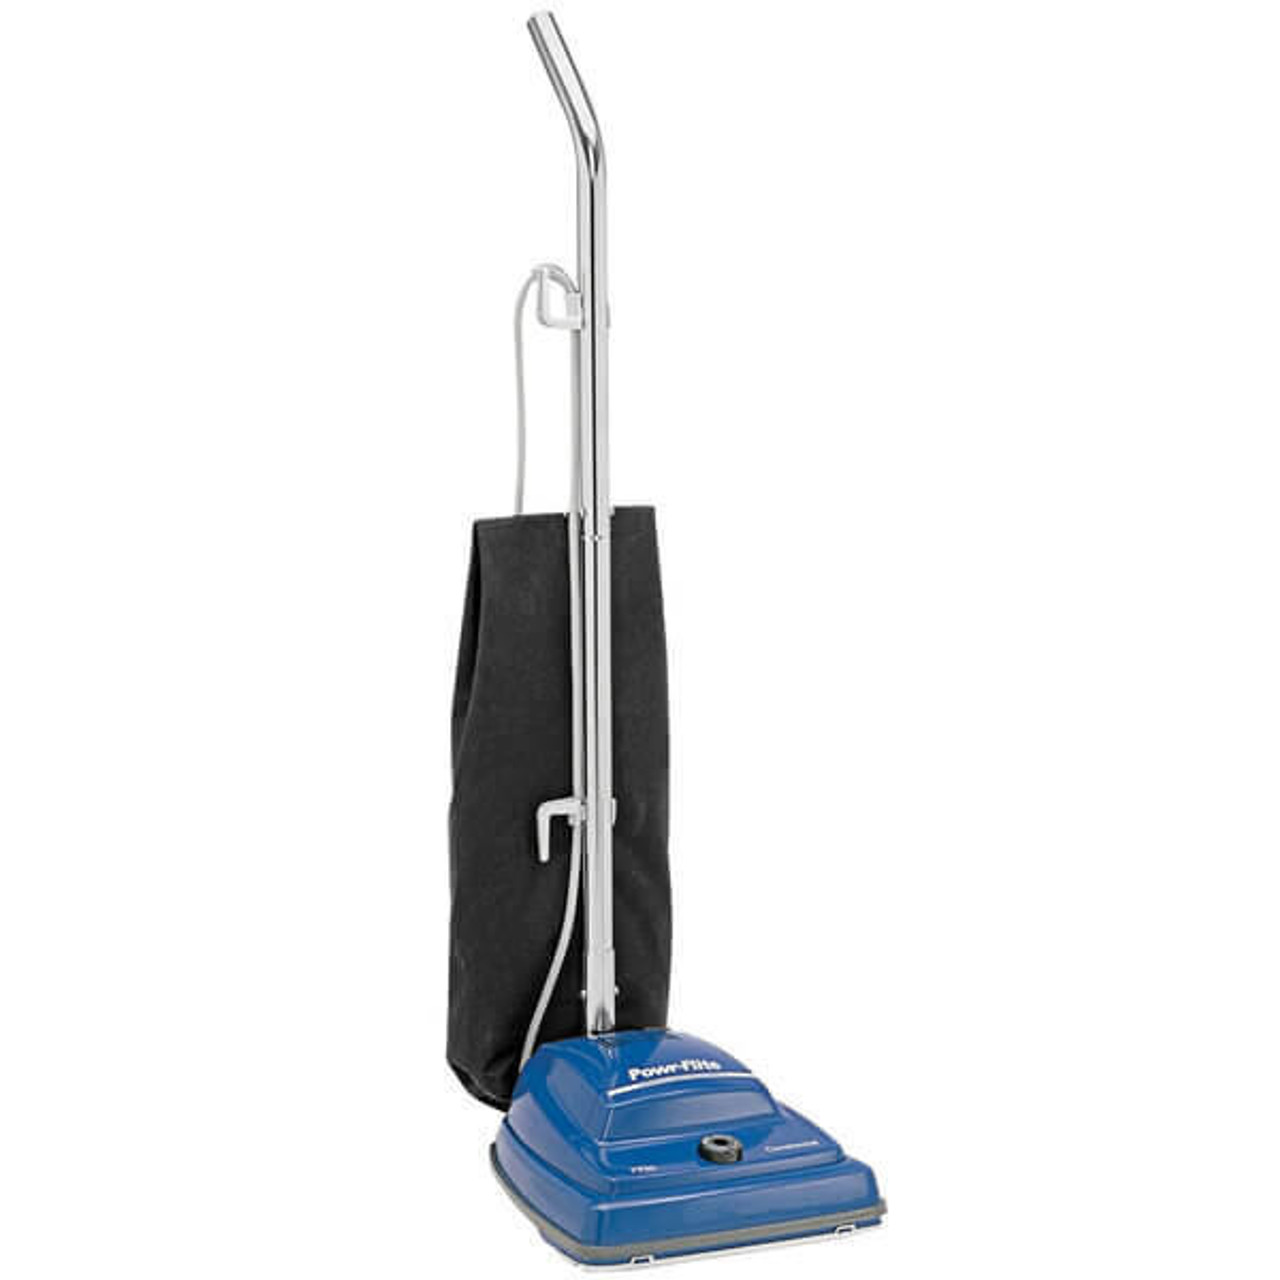  Powr-Flite 12" Lightweight Fleet Upright Vacuum Cleaner - Effortless Cleaning for Every Space 